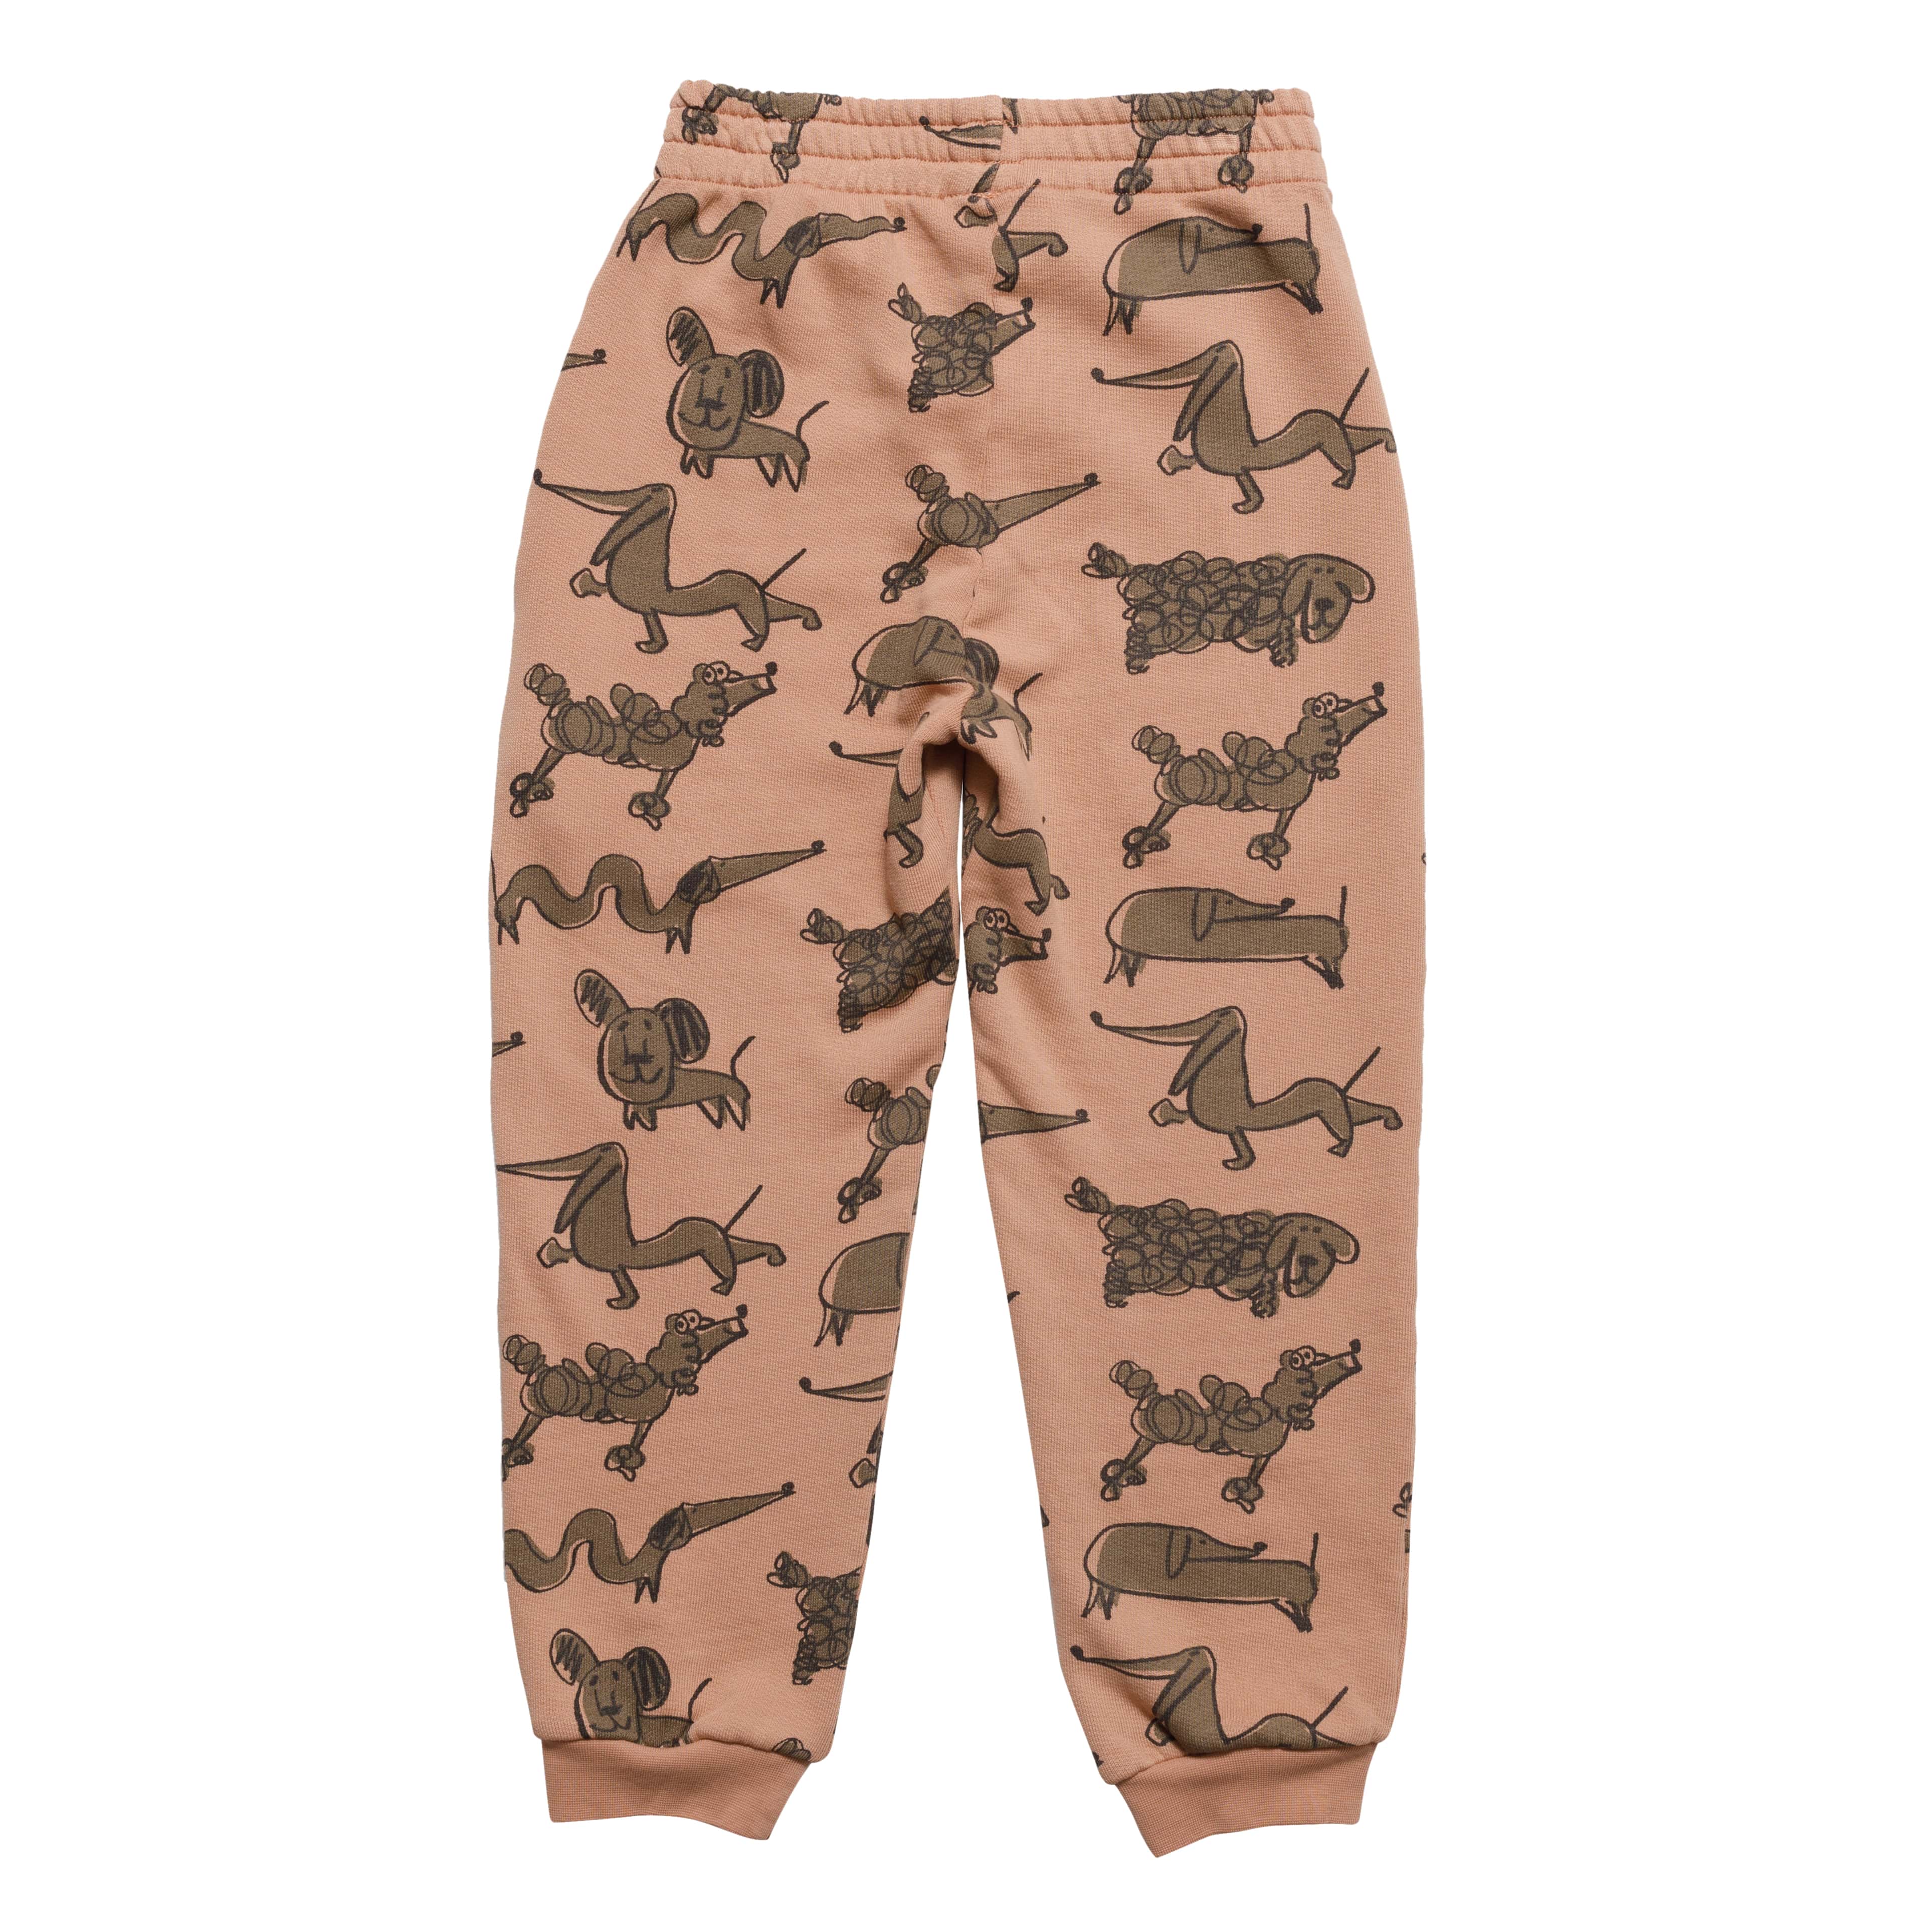 Boys & Girls Pink Printed Cotton Trousers